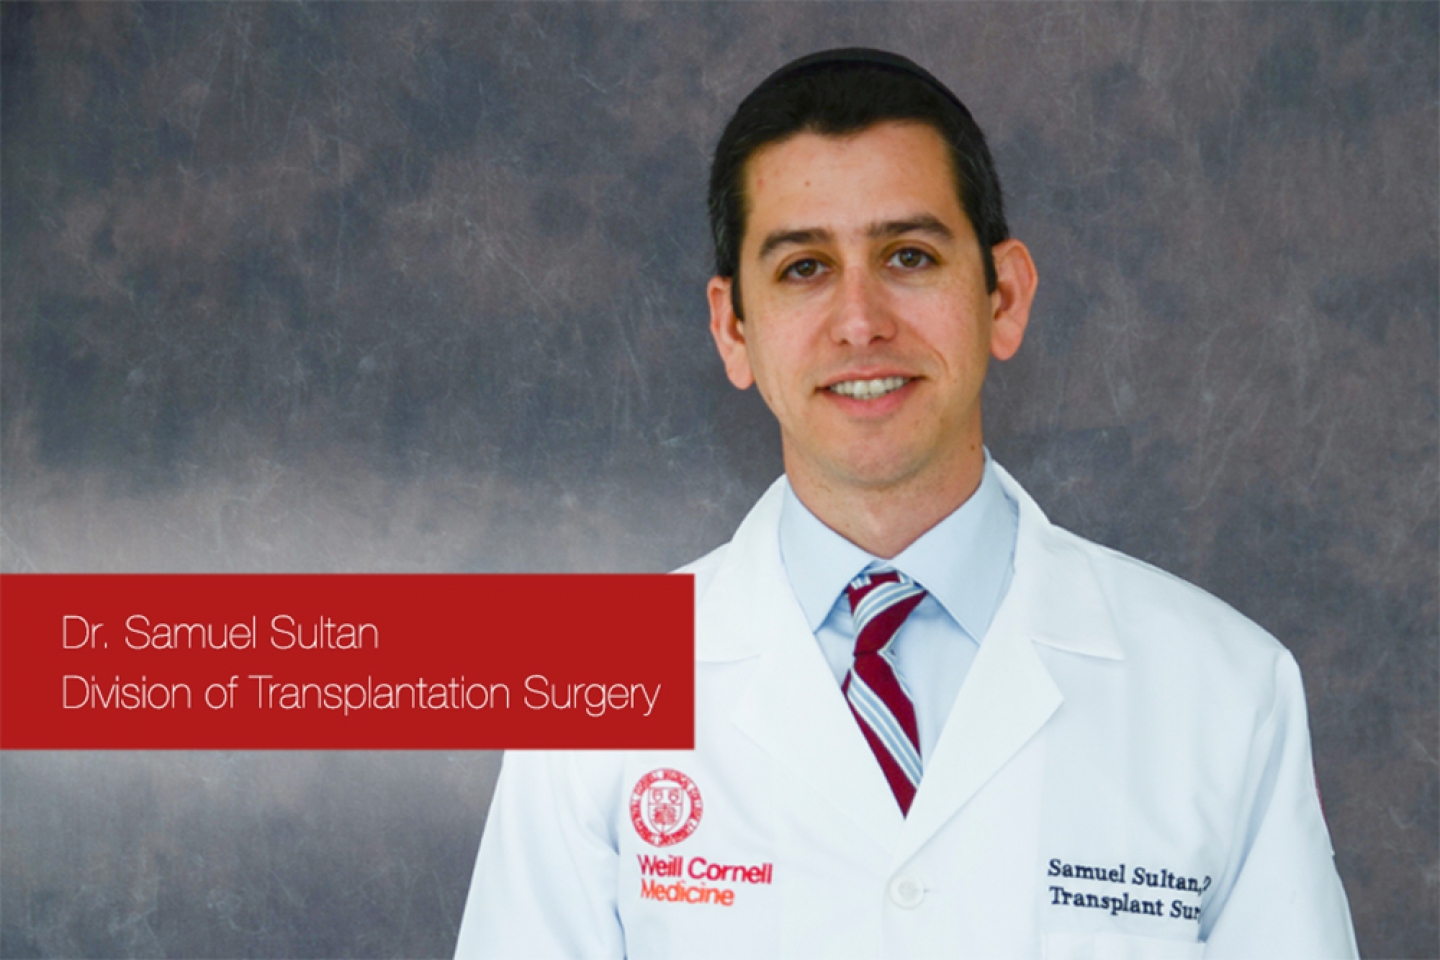 Portrait of Dr. Samuel Sultan from the Division of Transplantation Surgery